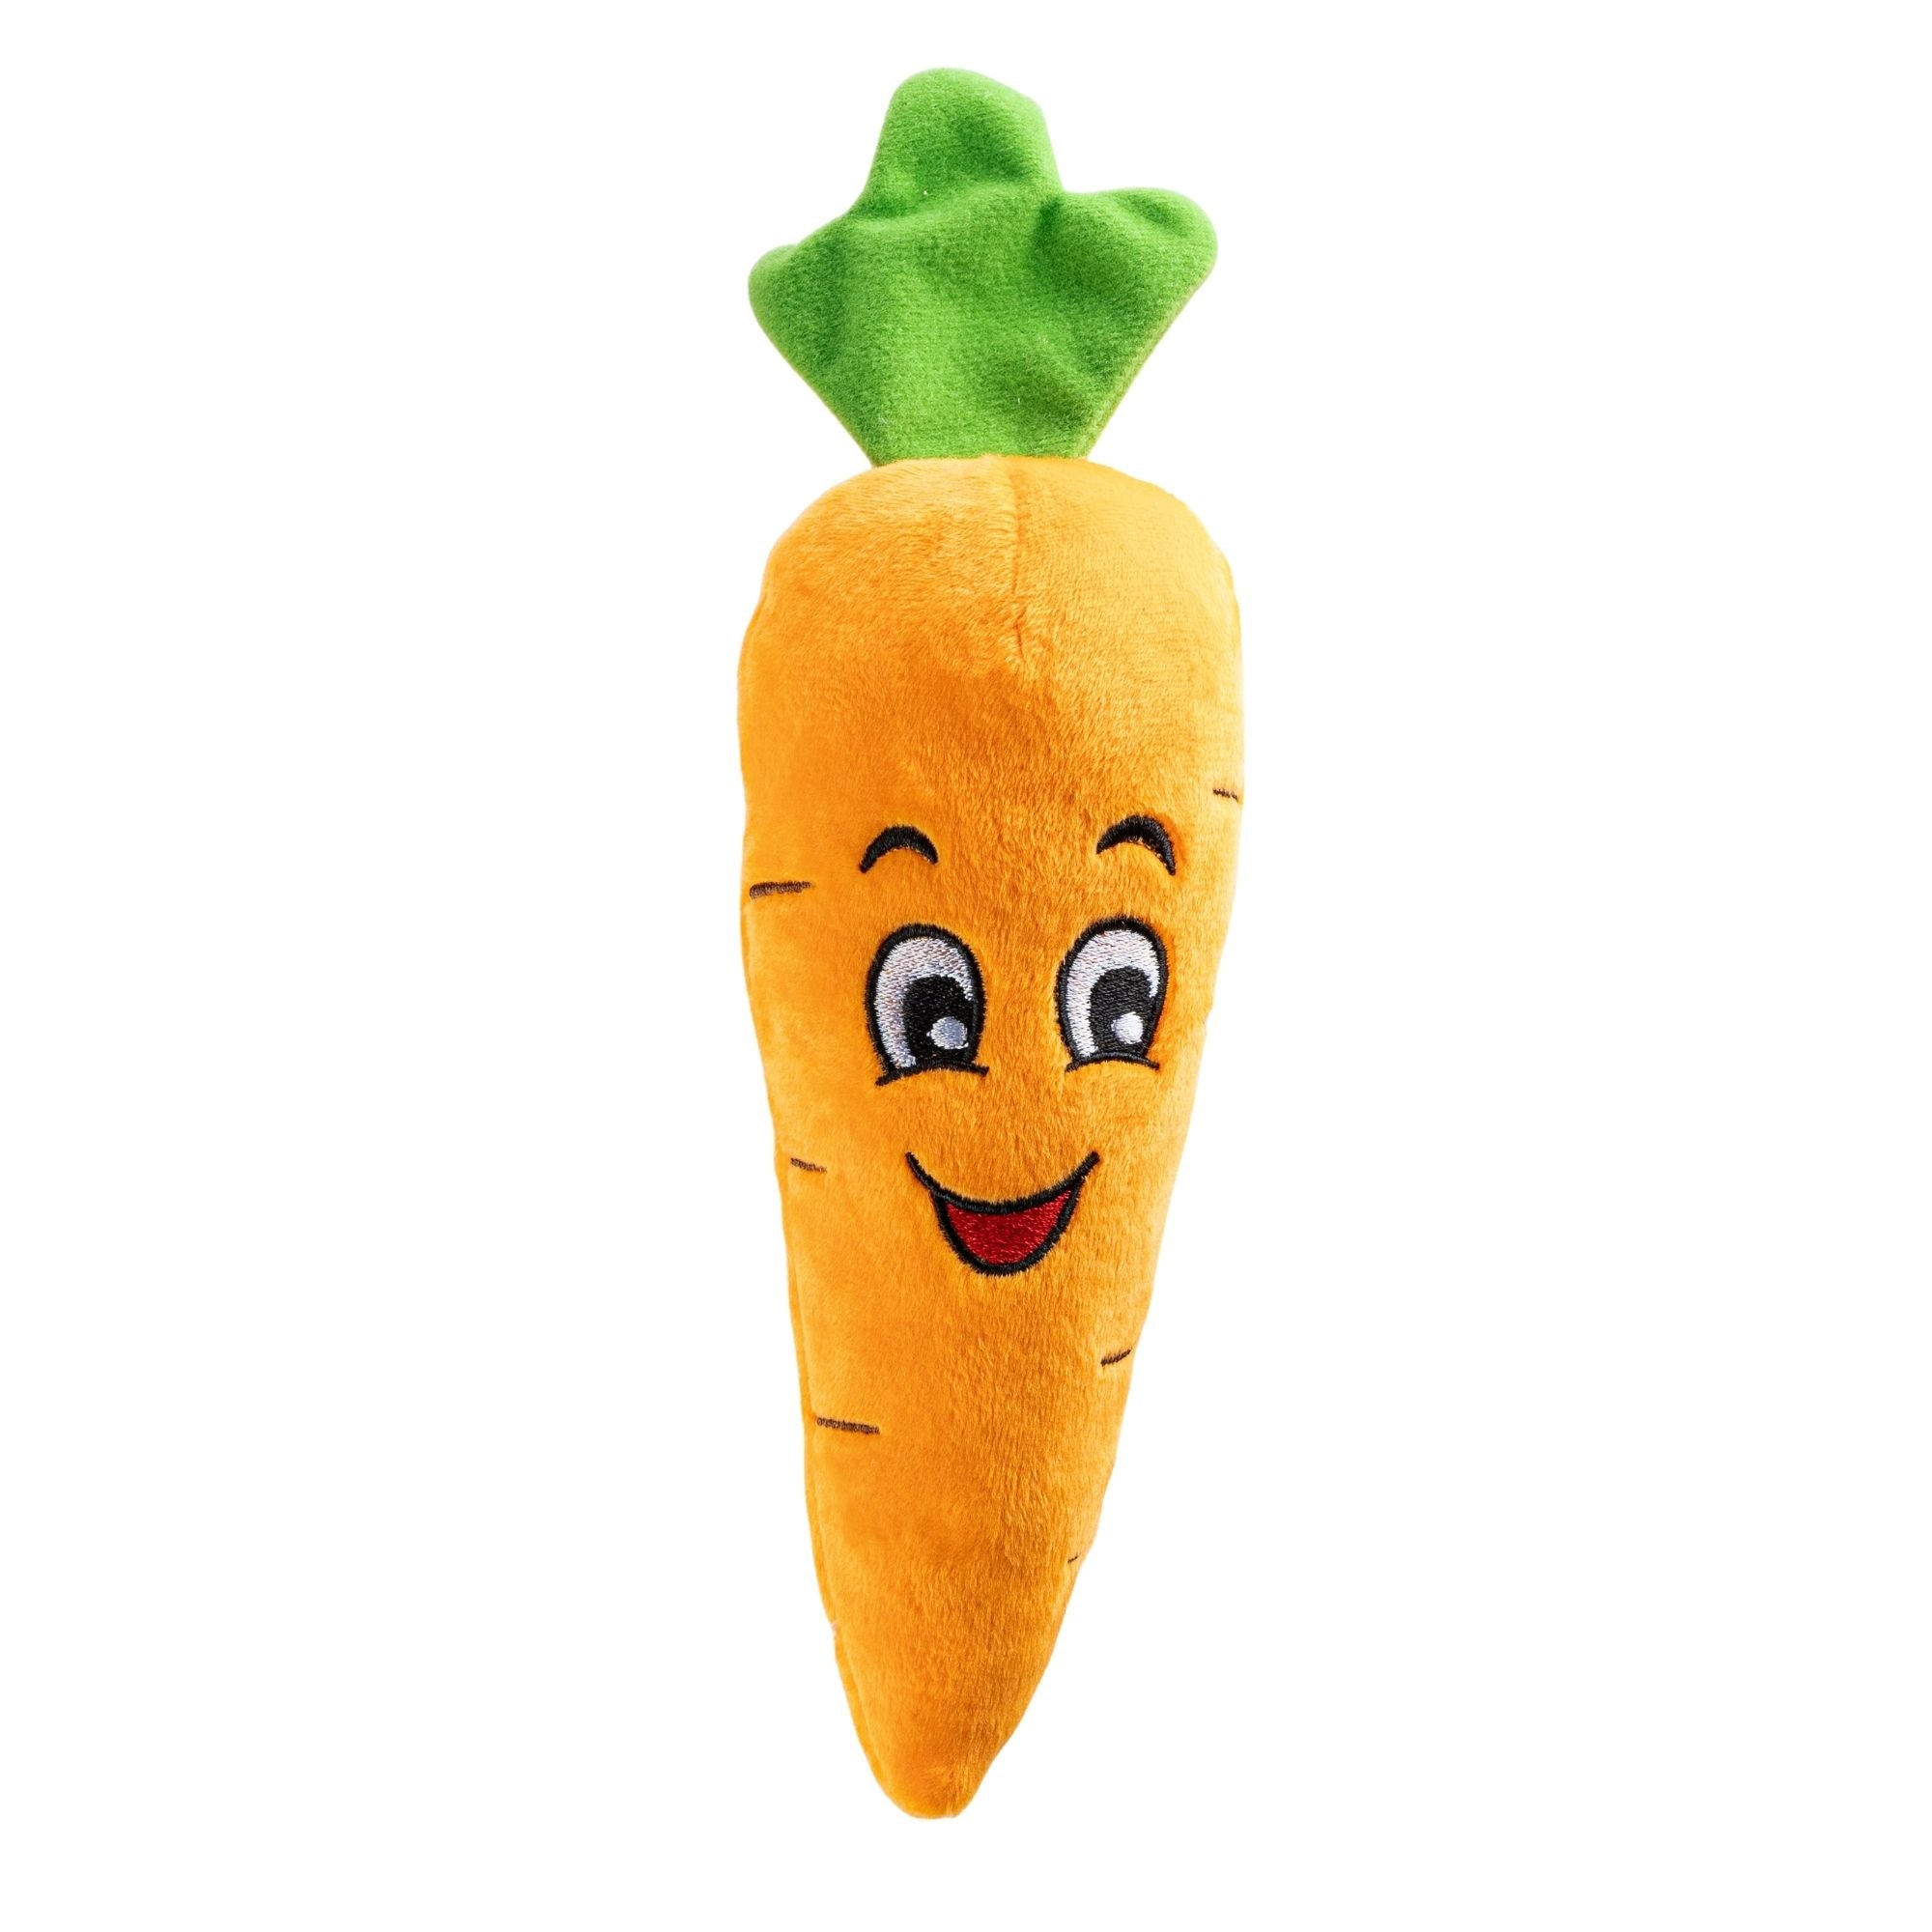 Midlee Plush Carrot Easter Dog Toy- Pack of 2, 1 - Gerbes Super